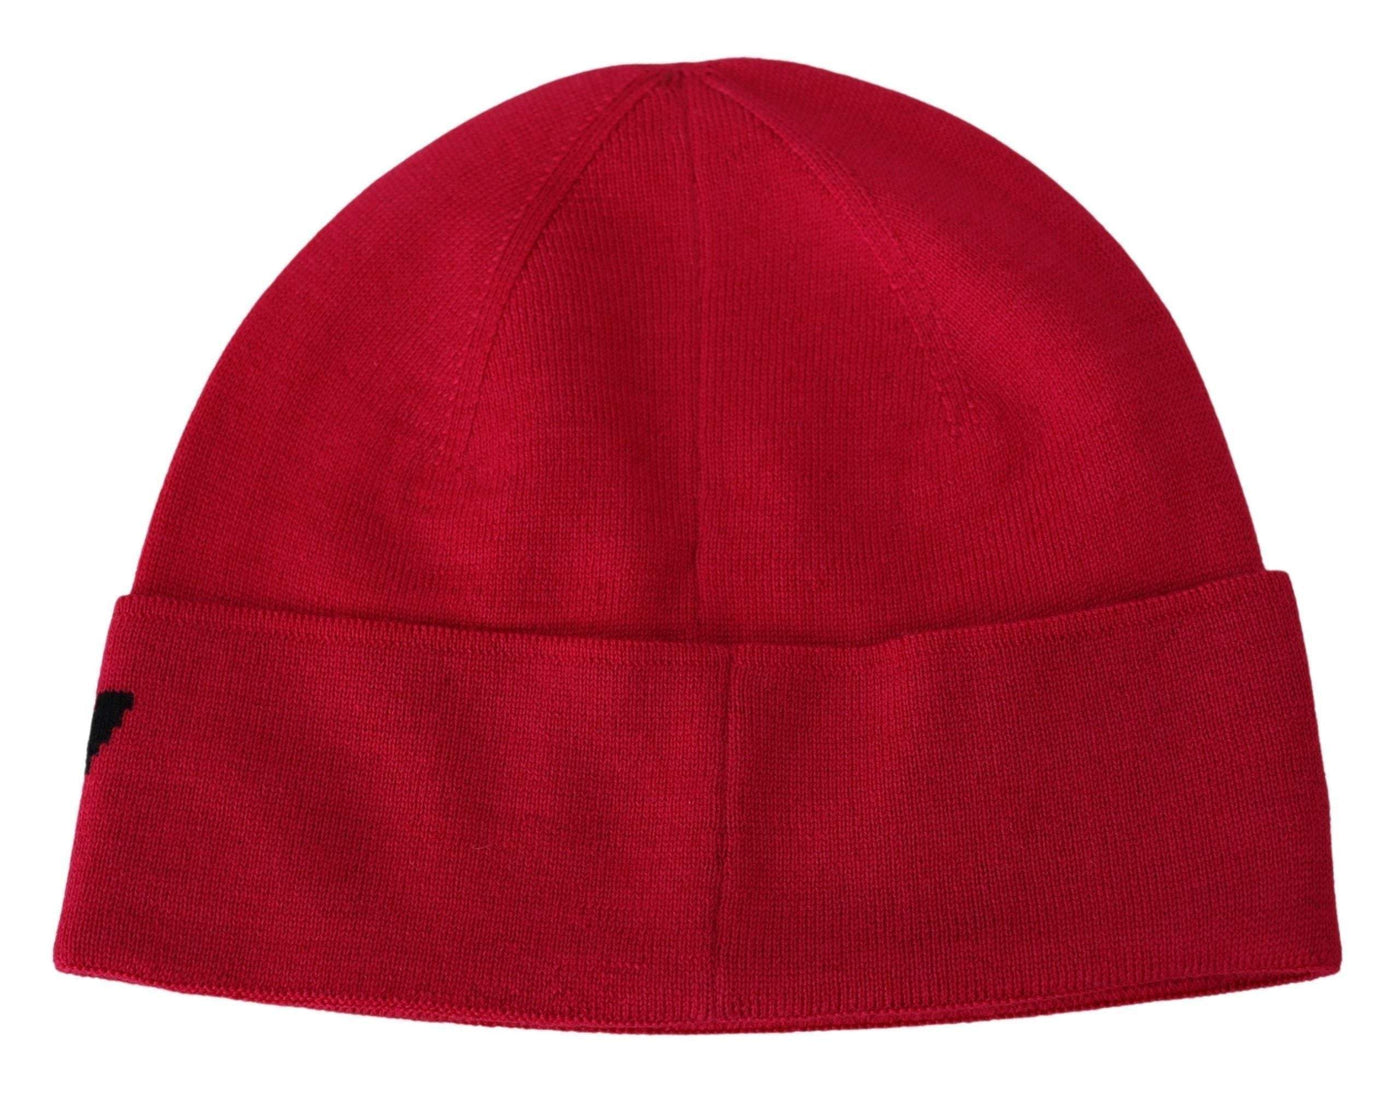 GIVENCHY Red Wool Beanie Unisex Men Women Beanie Hat #women, Accessories - New Arrivals, feed-agegroup-adult, feed-color-red, feed-gender-female, feed-size-58 cm|M, feed-size-OS, Gender_Women, GIVENCHY, Hats & Caps - Men - Accessories, Hats - Women - Accessories, Red at SEYMAYKA